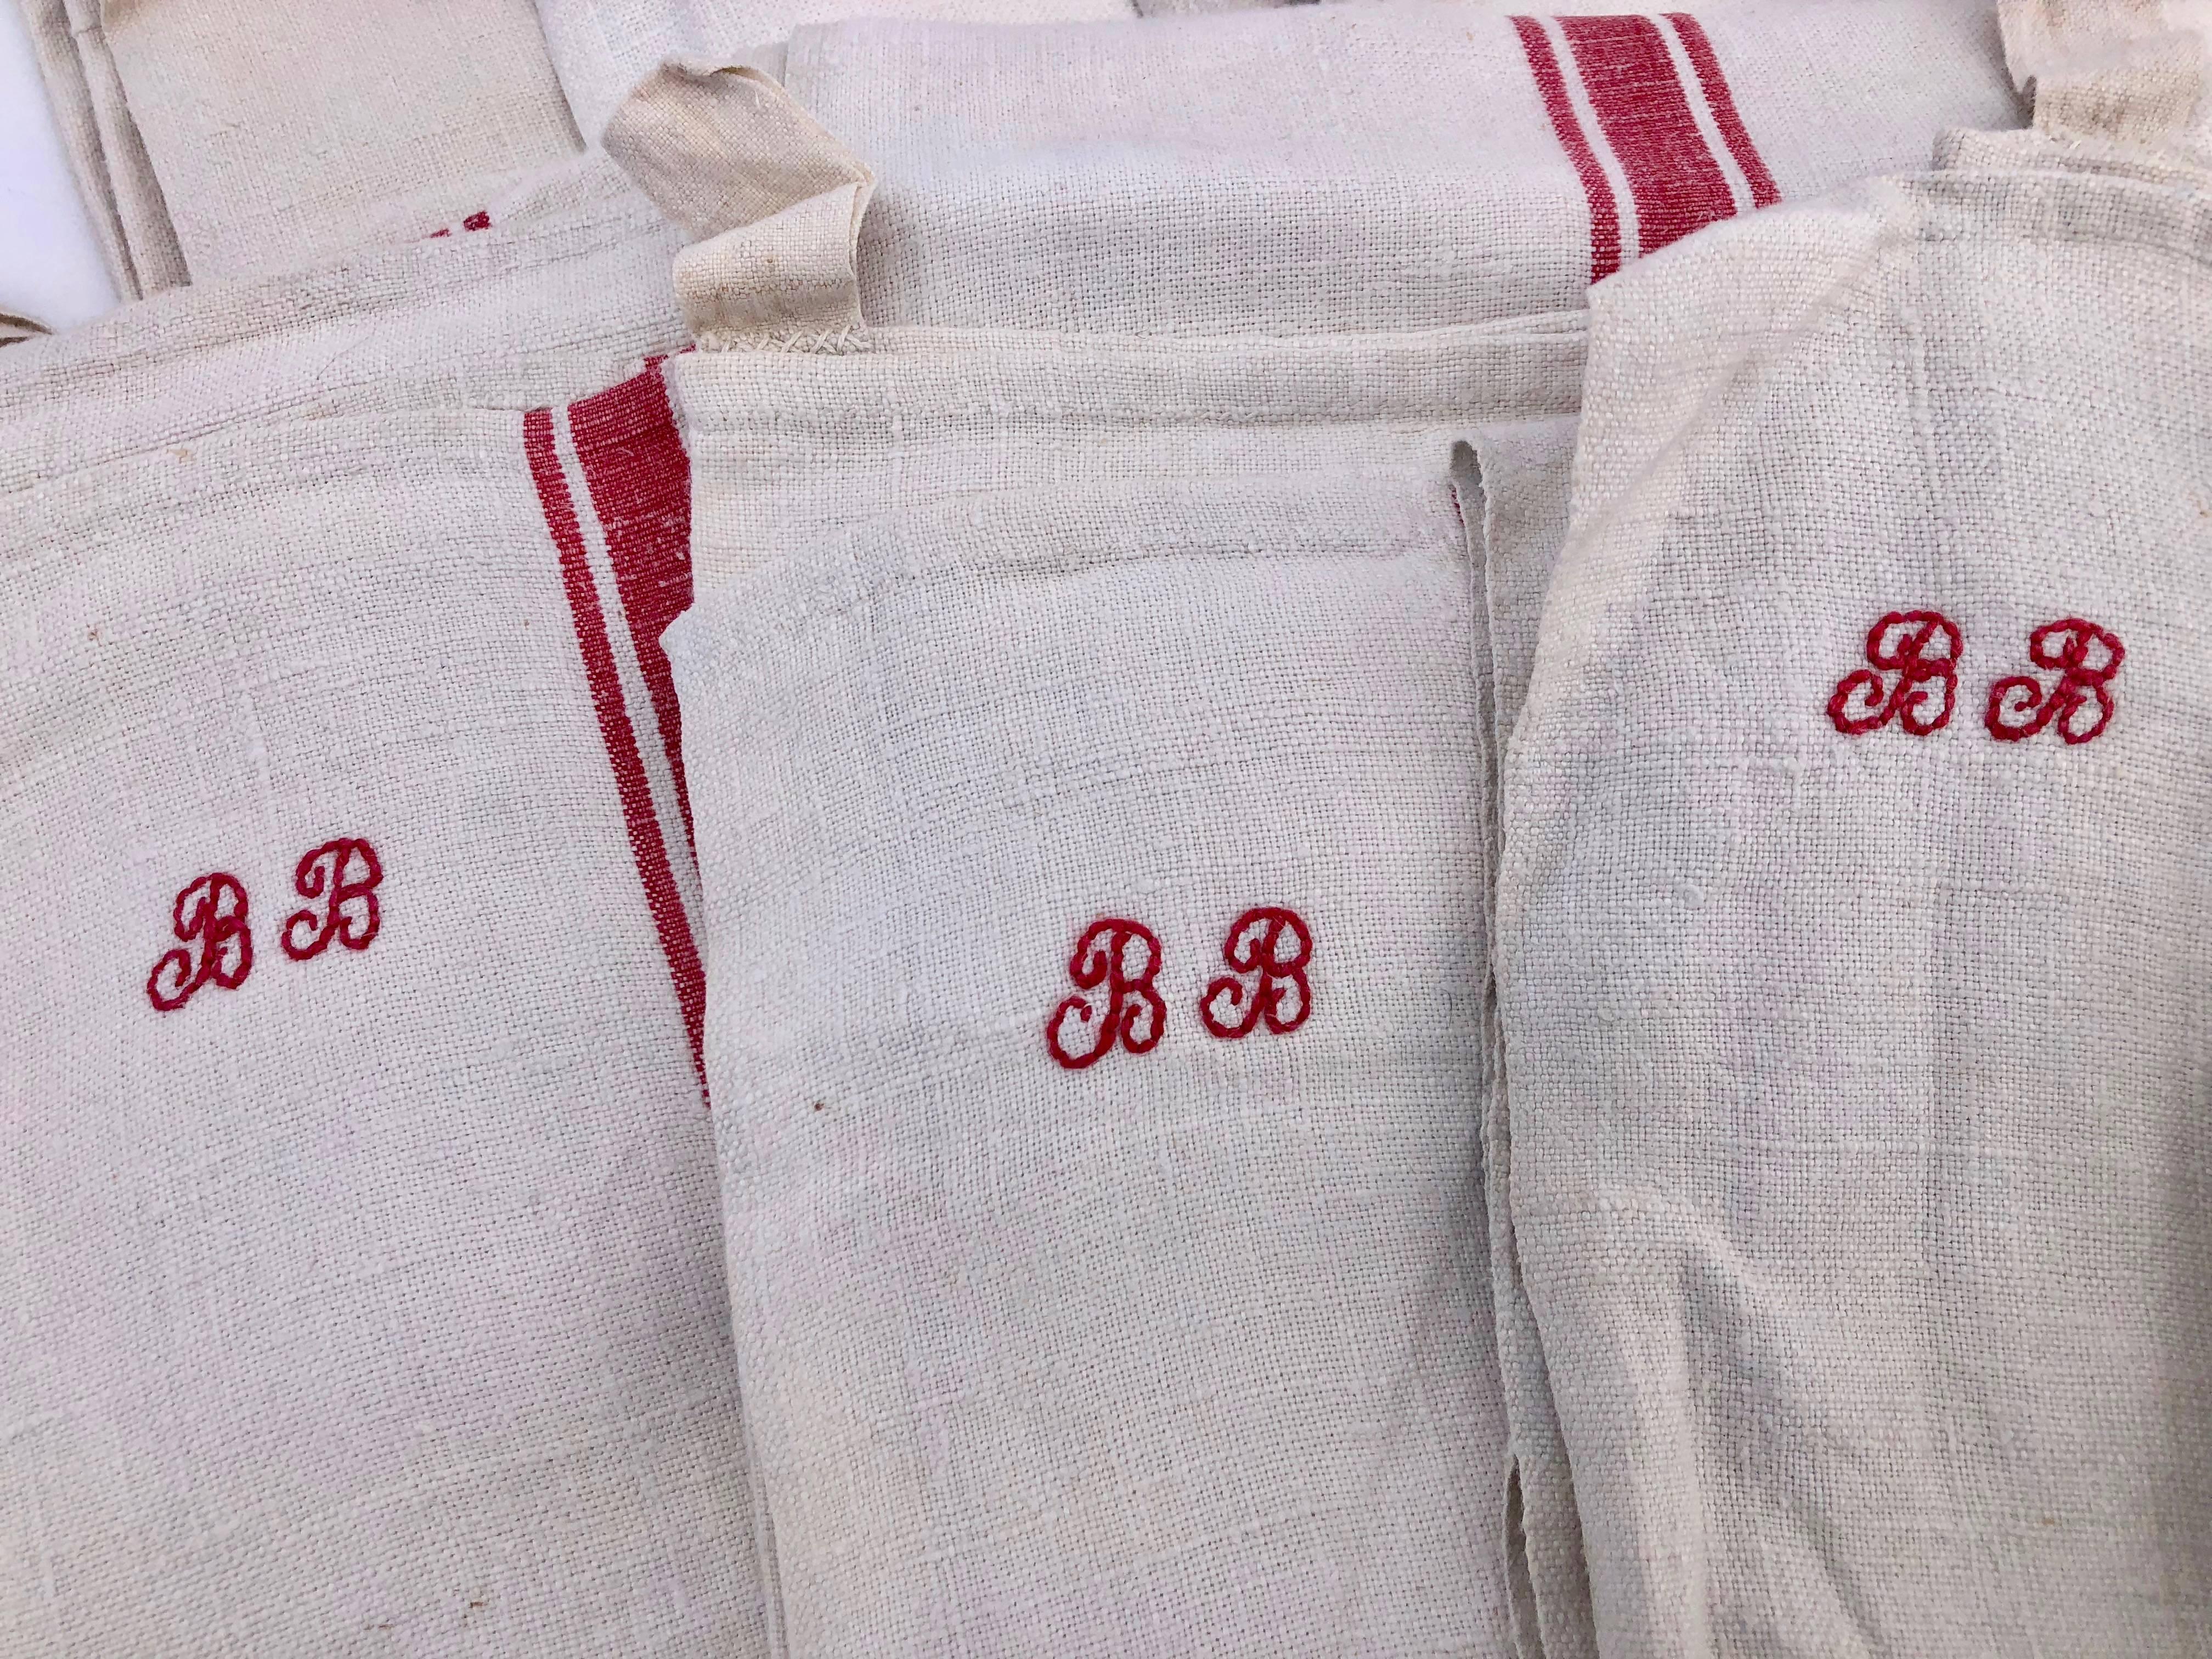 These lovely French antique linen kitchen towels are a set of 14 and all are embroidered with red 